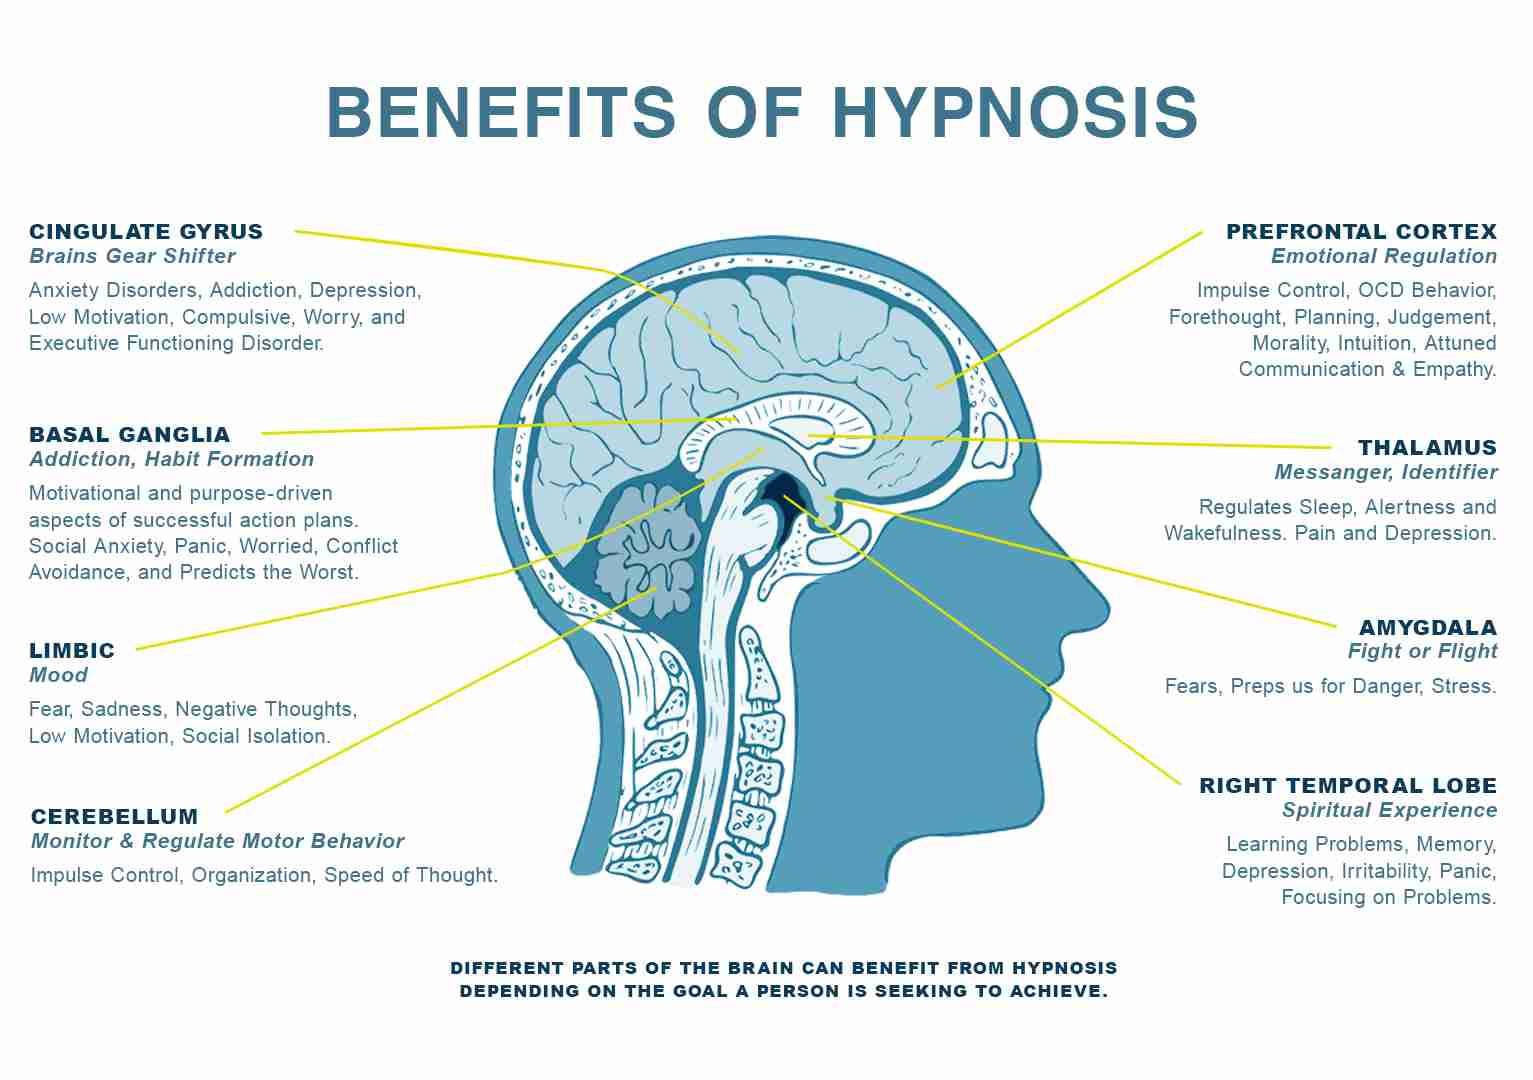 Benefits of Hypnosis